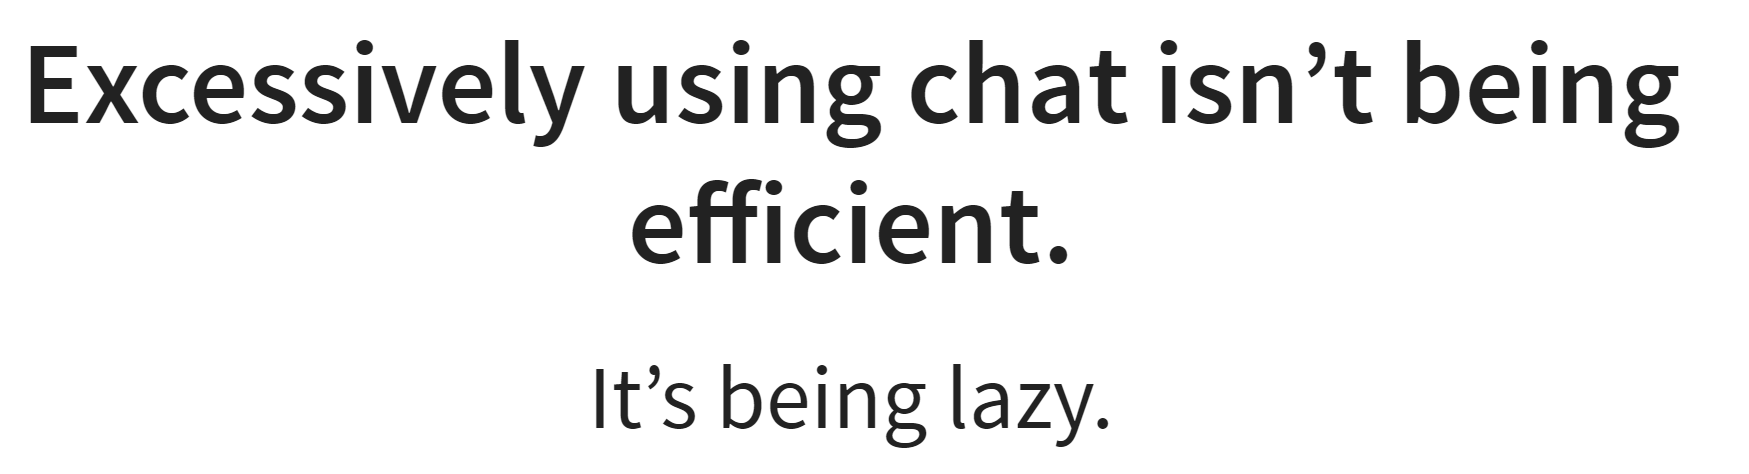 Chat is lazy